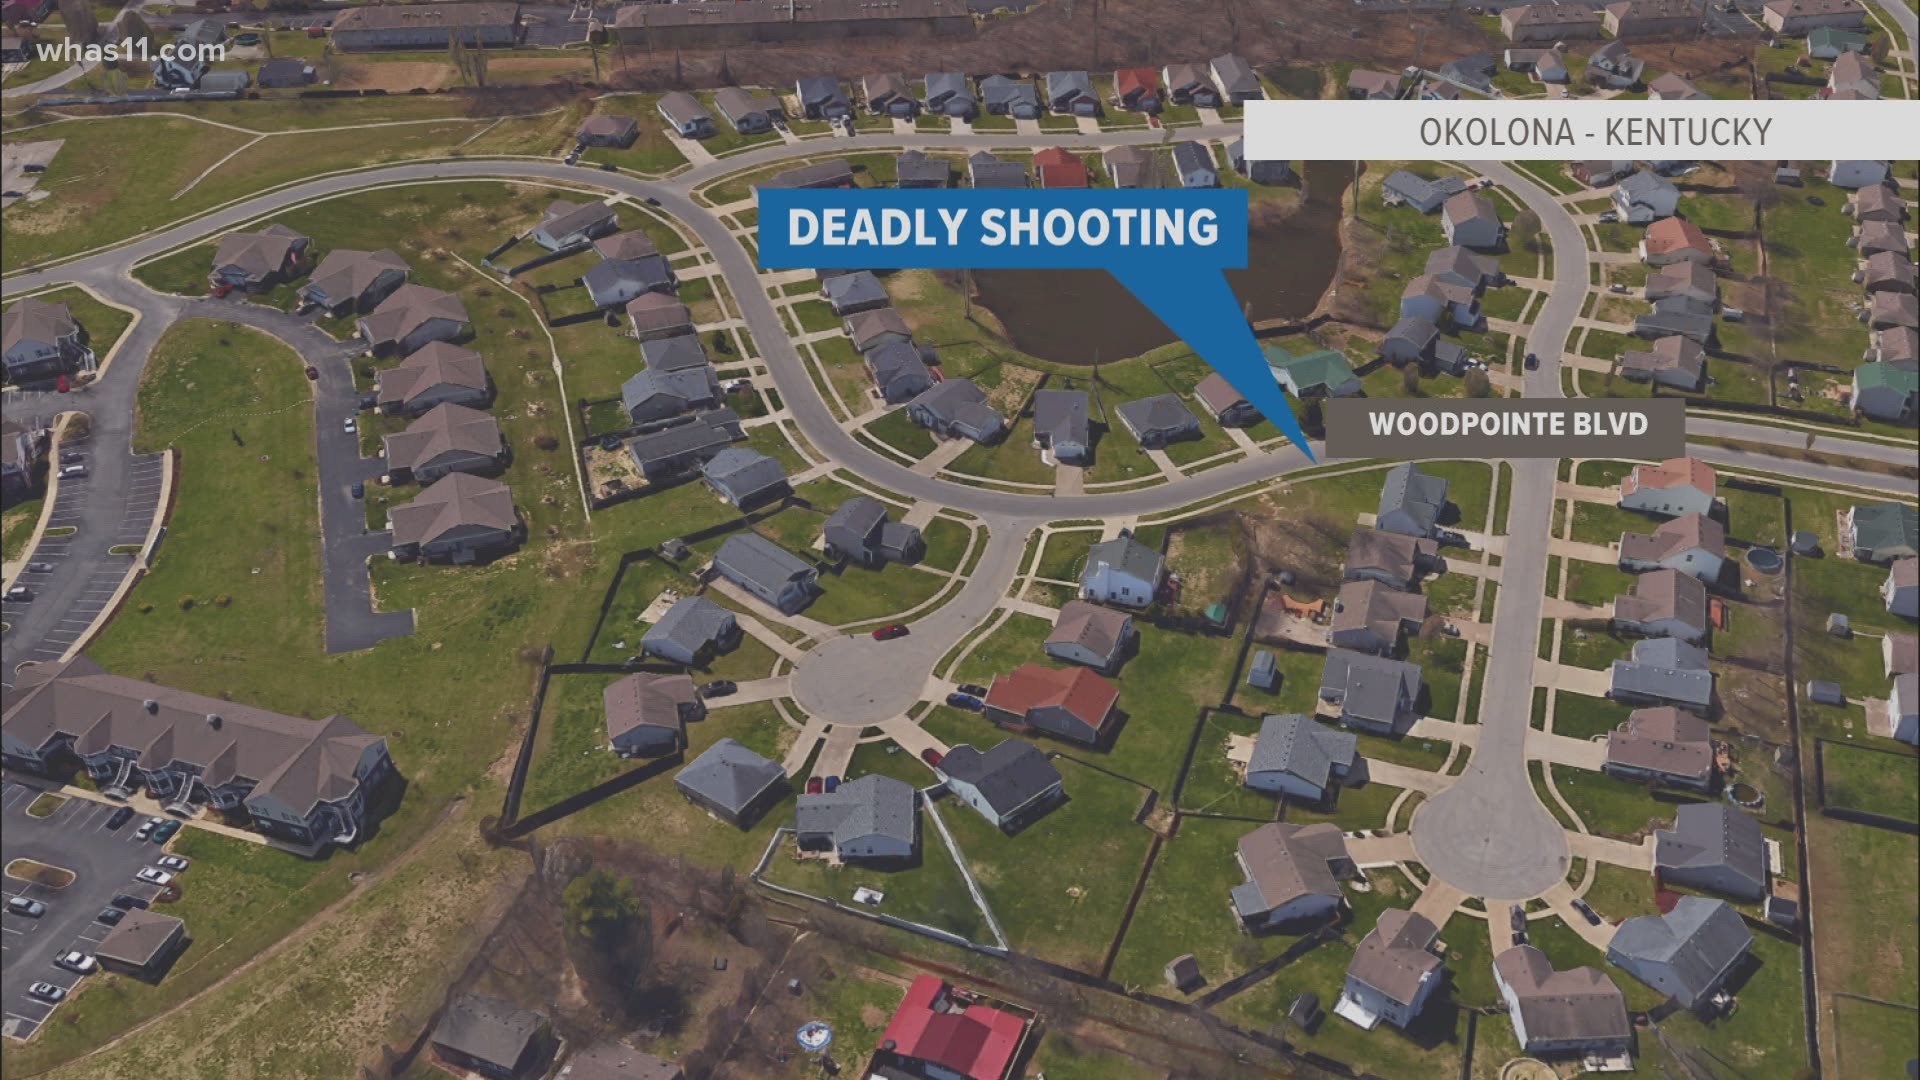 A woman was shot and killed early Tuesday morning, according to Louisville Metro Police.